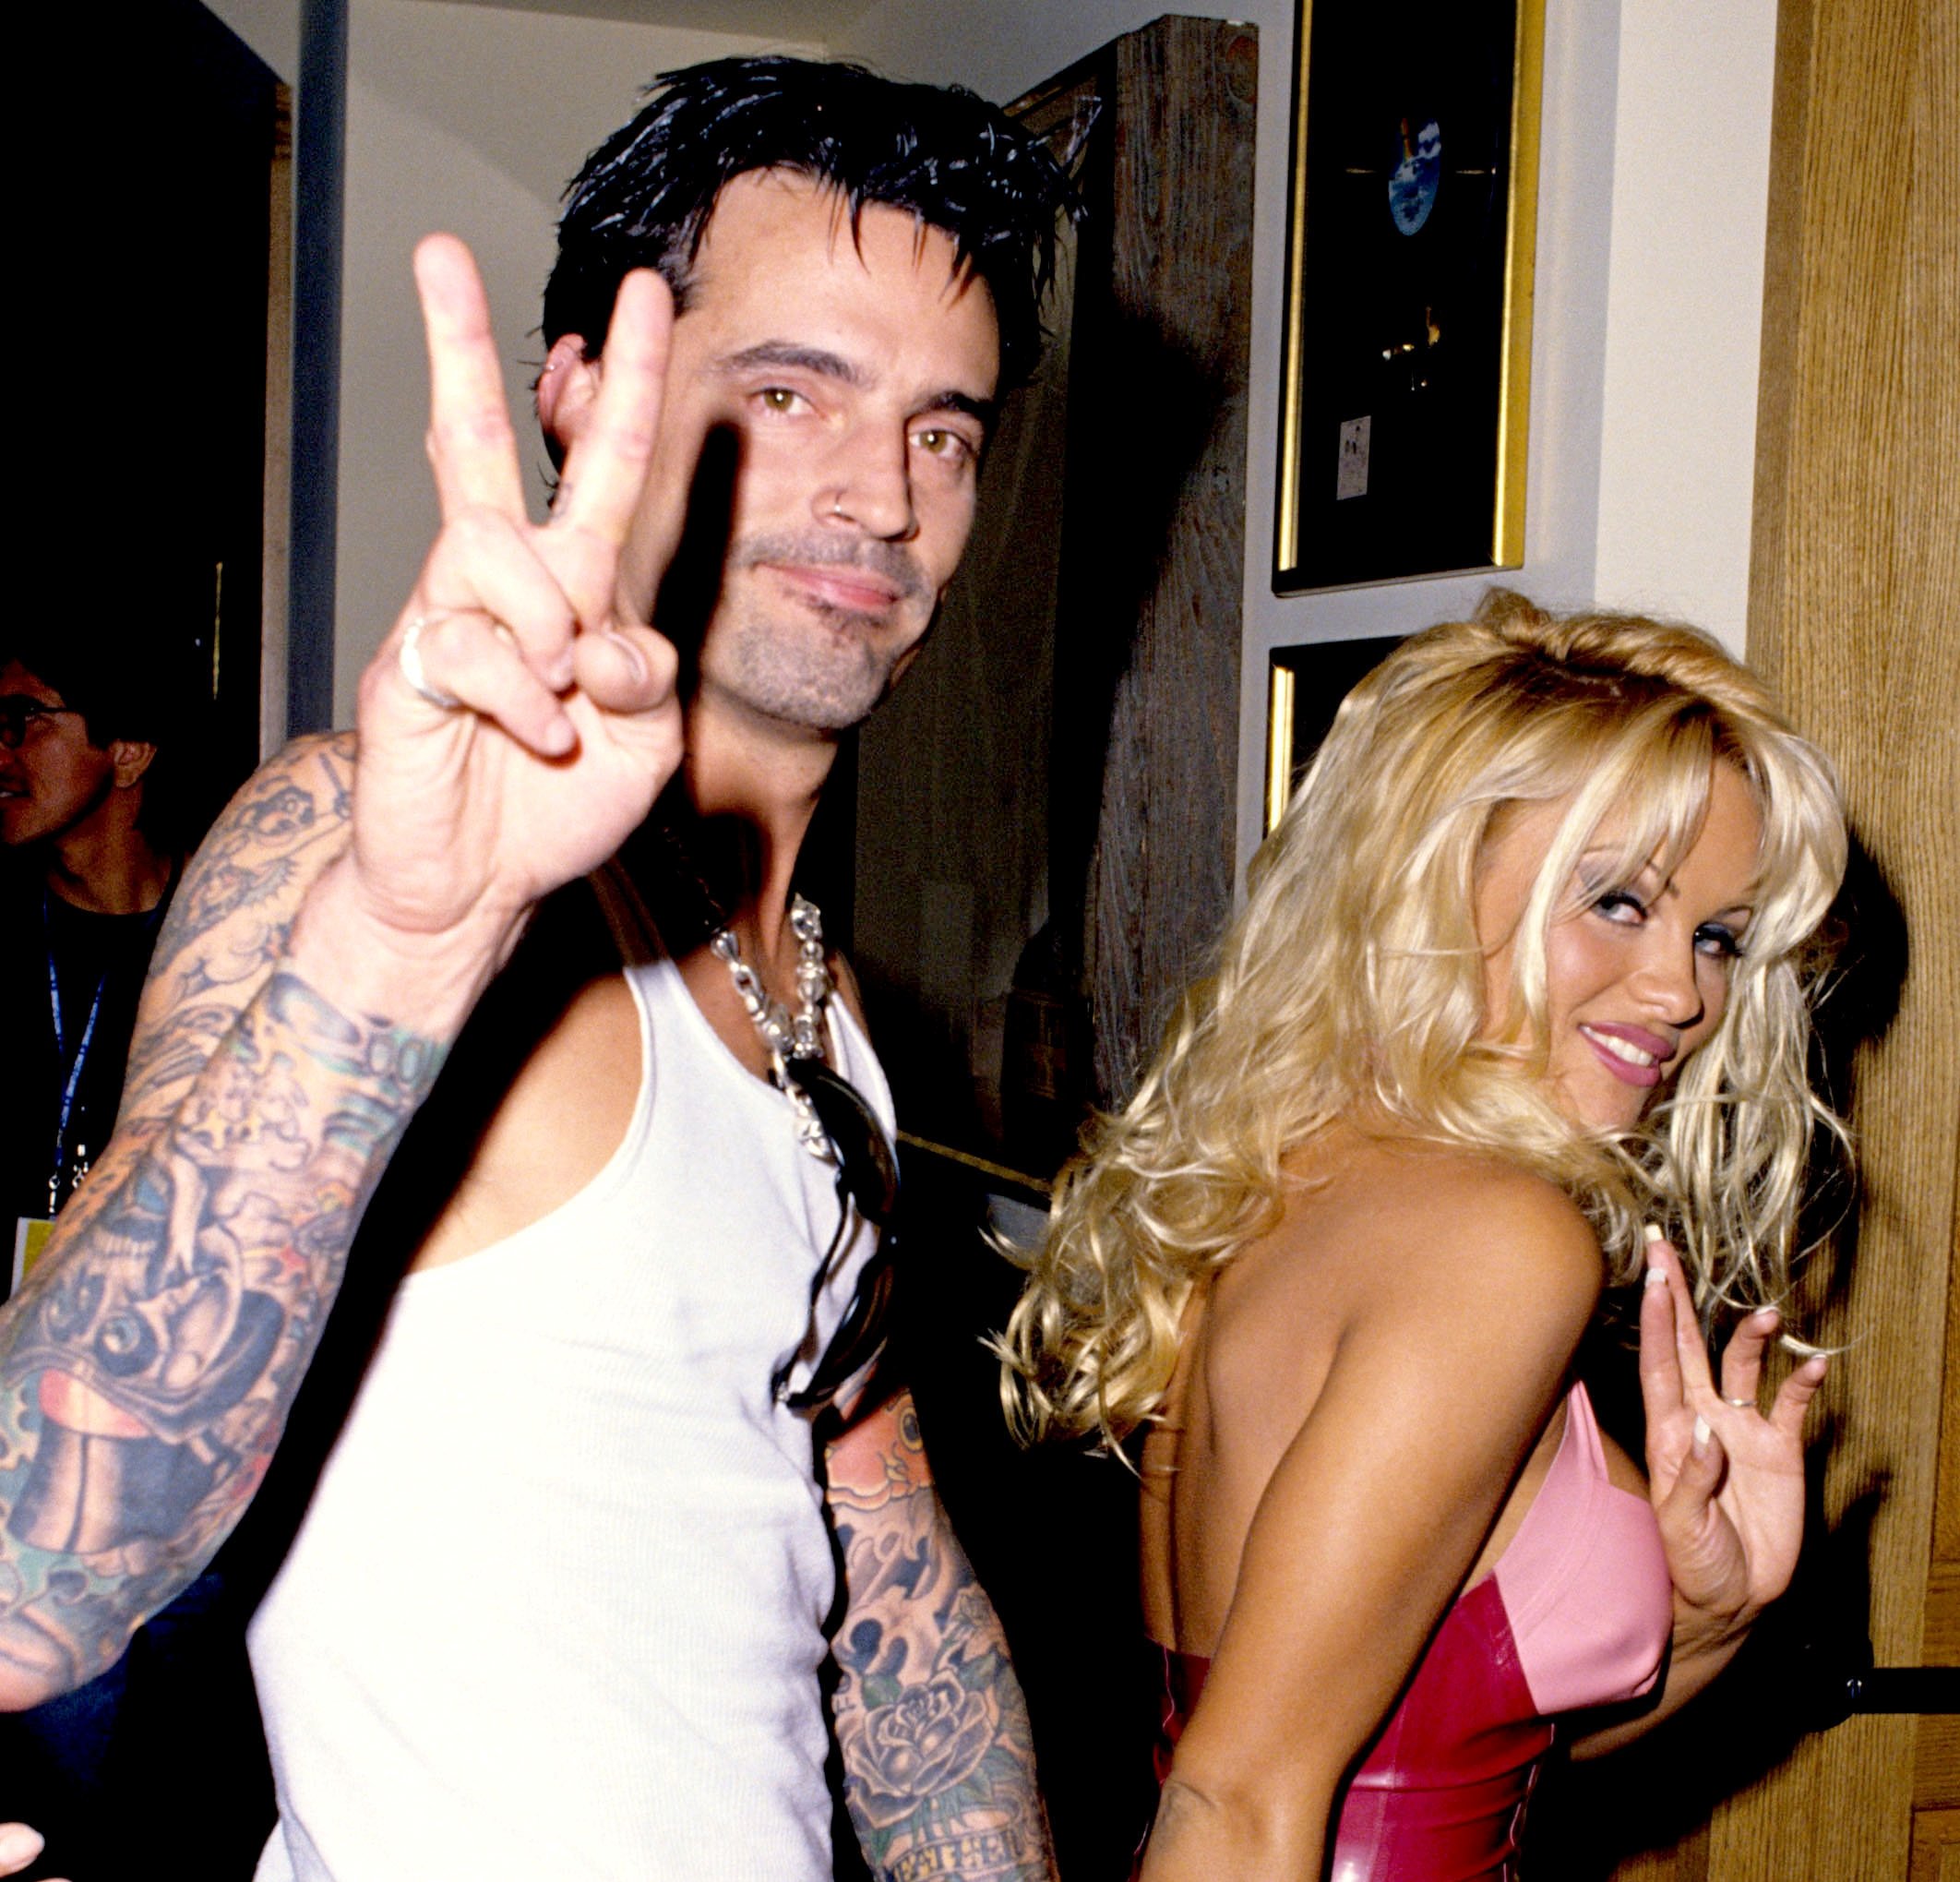 Pamela Anderson and Tommy Lee smiling and waving to the cameras during a hotel opening in Las Vegas